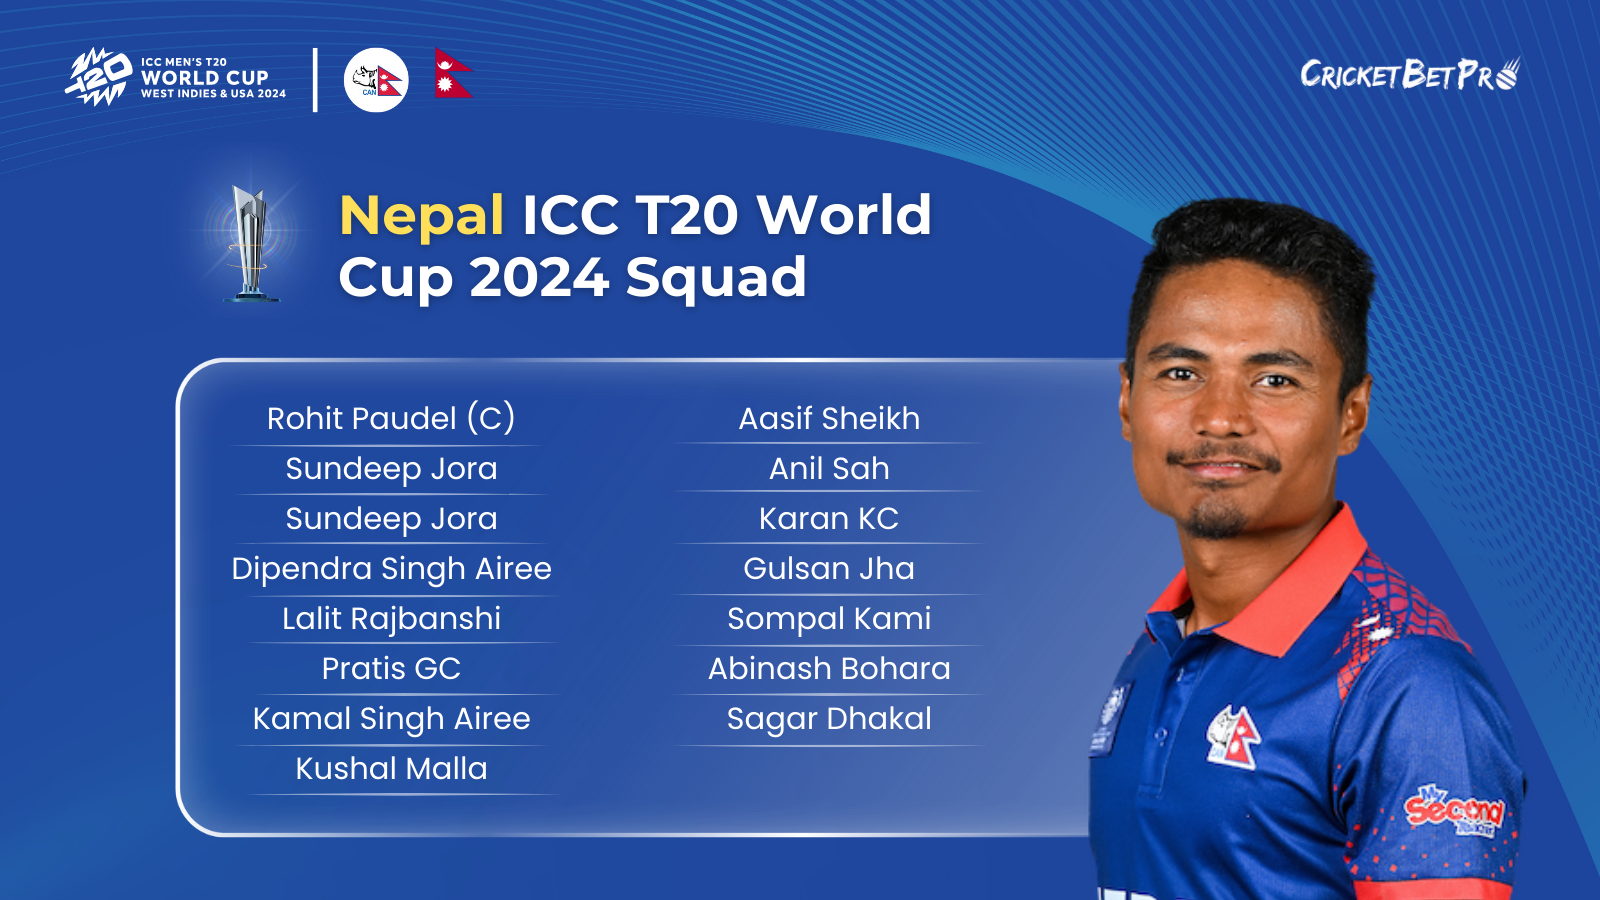 Nepal ICC T20 World Cup 2024 Squad